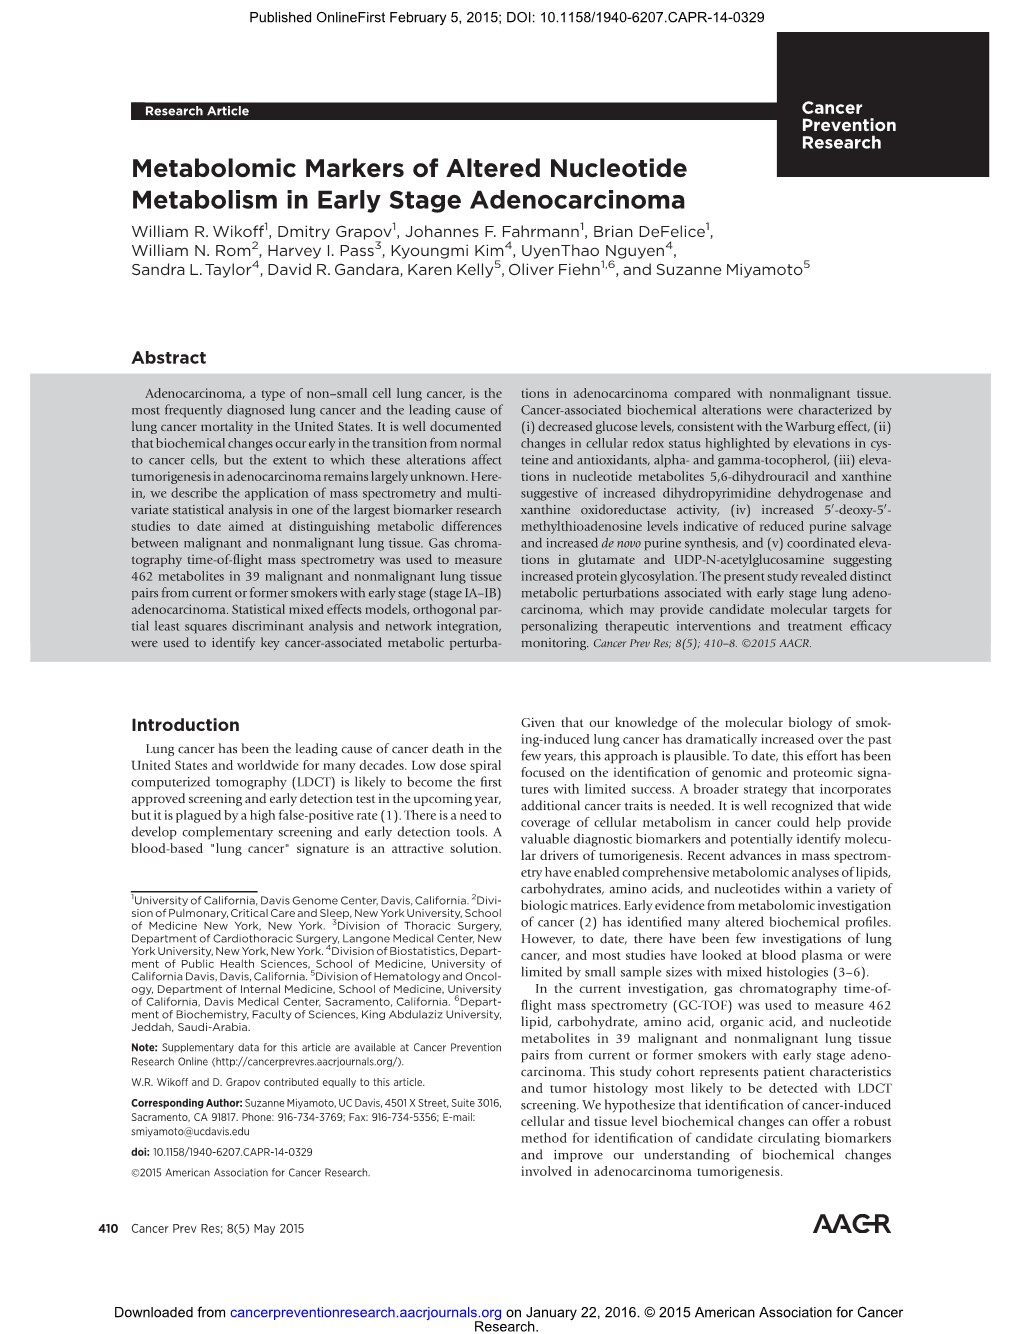 Metabolomic Markers of Altered Nucleotide Metabolism in Early Stage Adenocarcinoma William R